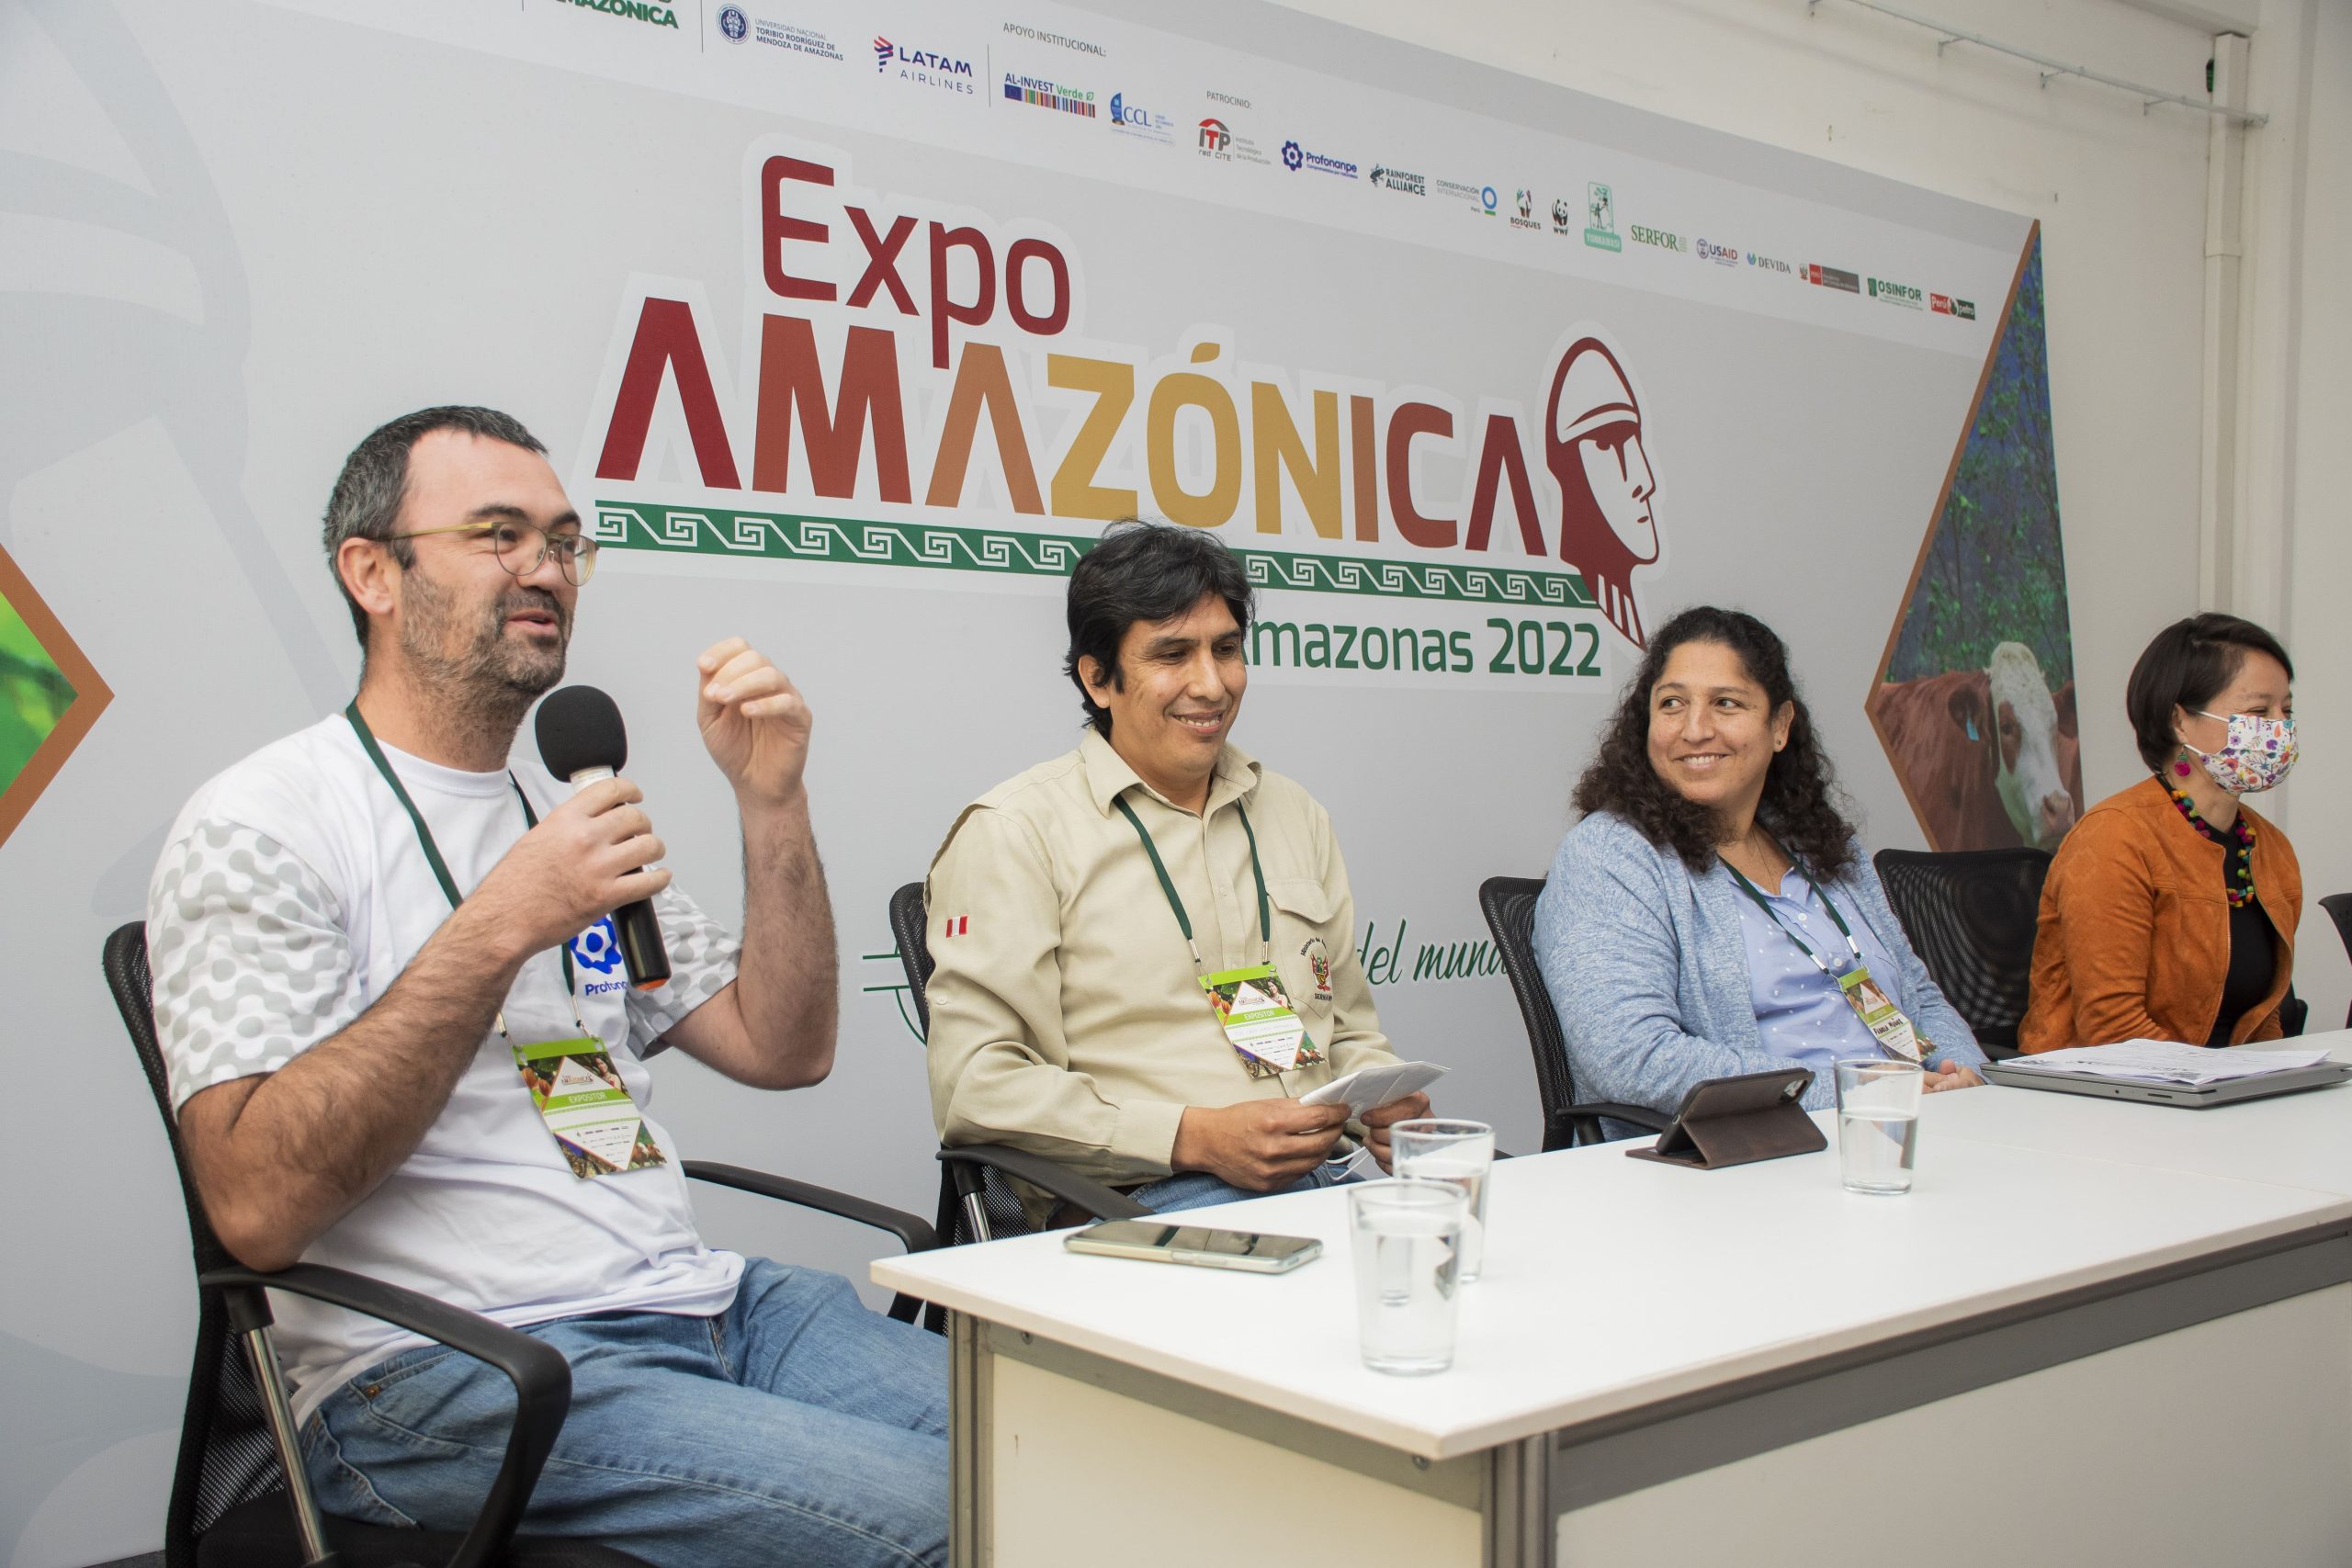 Anton Williems, CEO of Profonanpe, together with Jose Carlos Nieto (Sernanp), Fabiola Muñoz (GCF) and Margarita Medina (Andes Amazon Fund), in the session “Biodiversity Conservation for Local Development: Experiences from the Regions”.